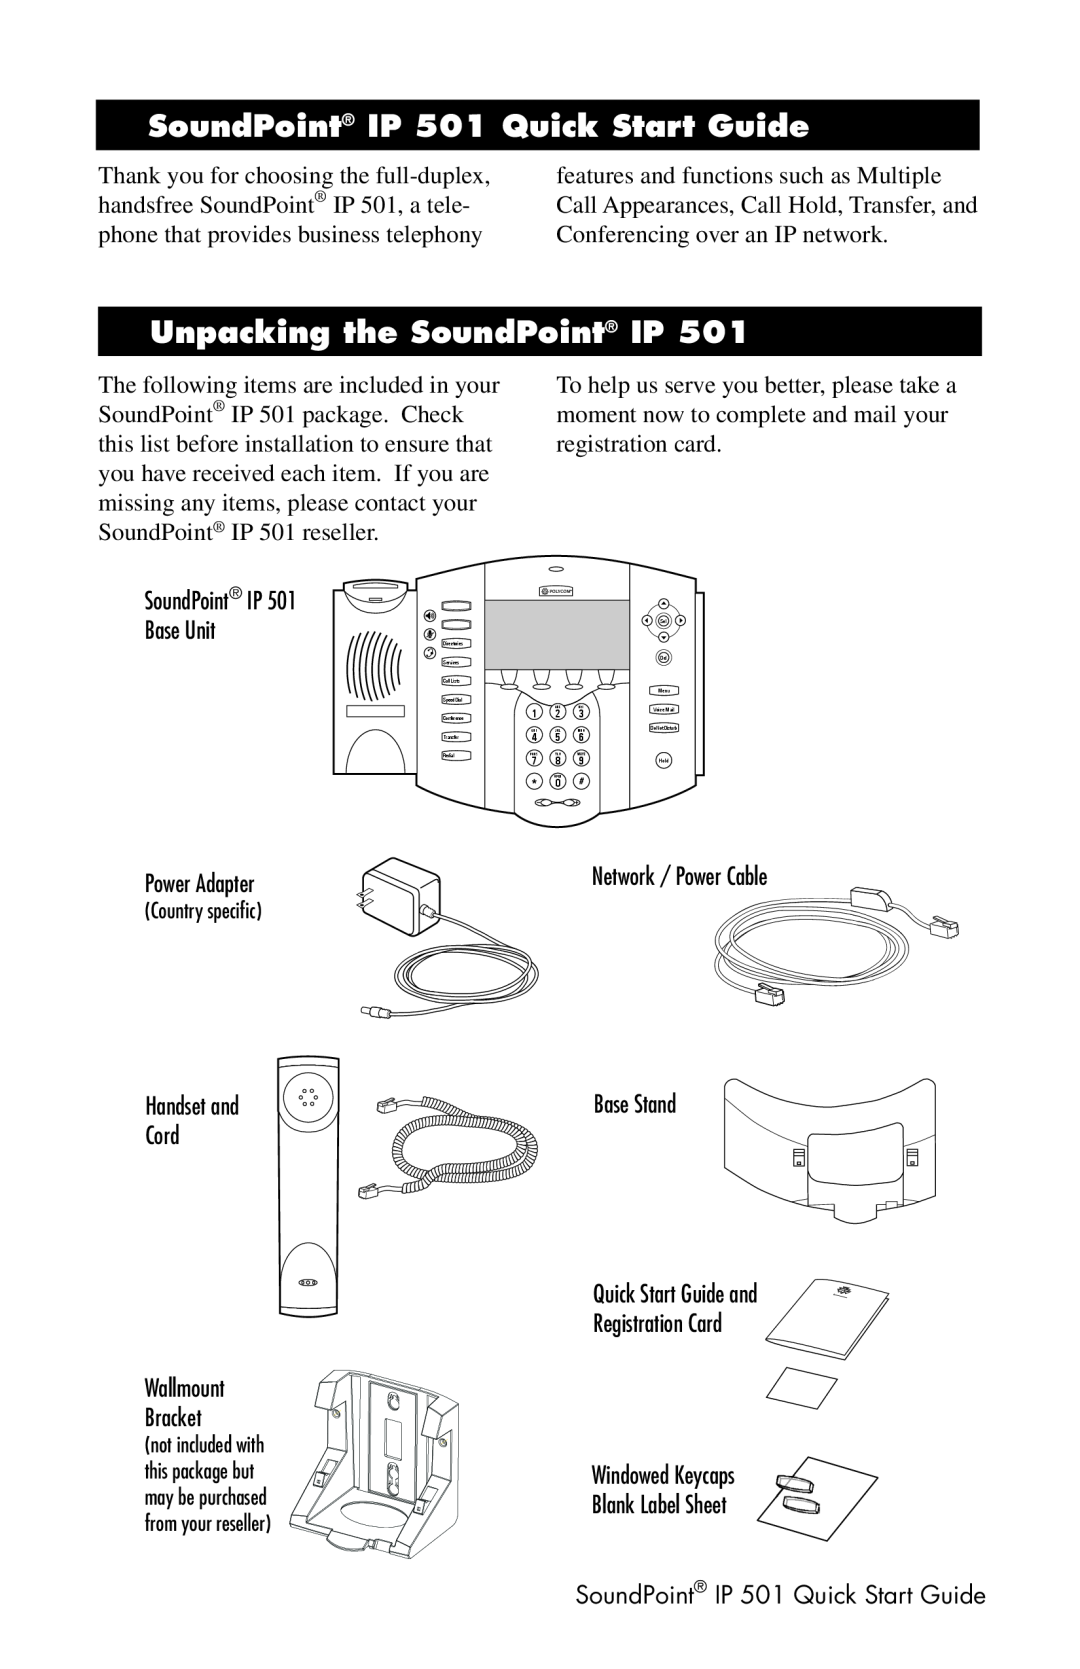 Polycom Telephone warranty SoundPoint IP 501 Quick Start Guide, Unpacking the SoundPoint IP, Power Adapter 